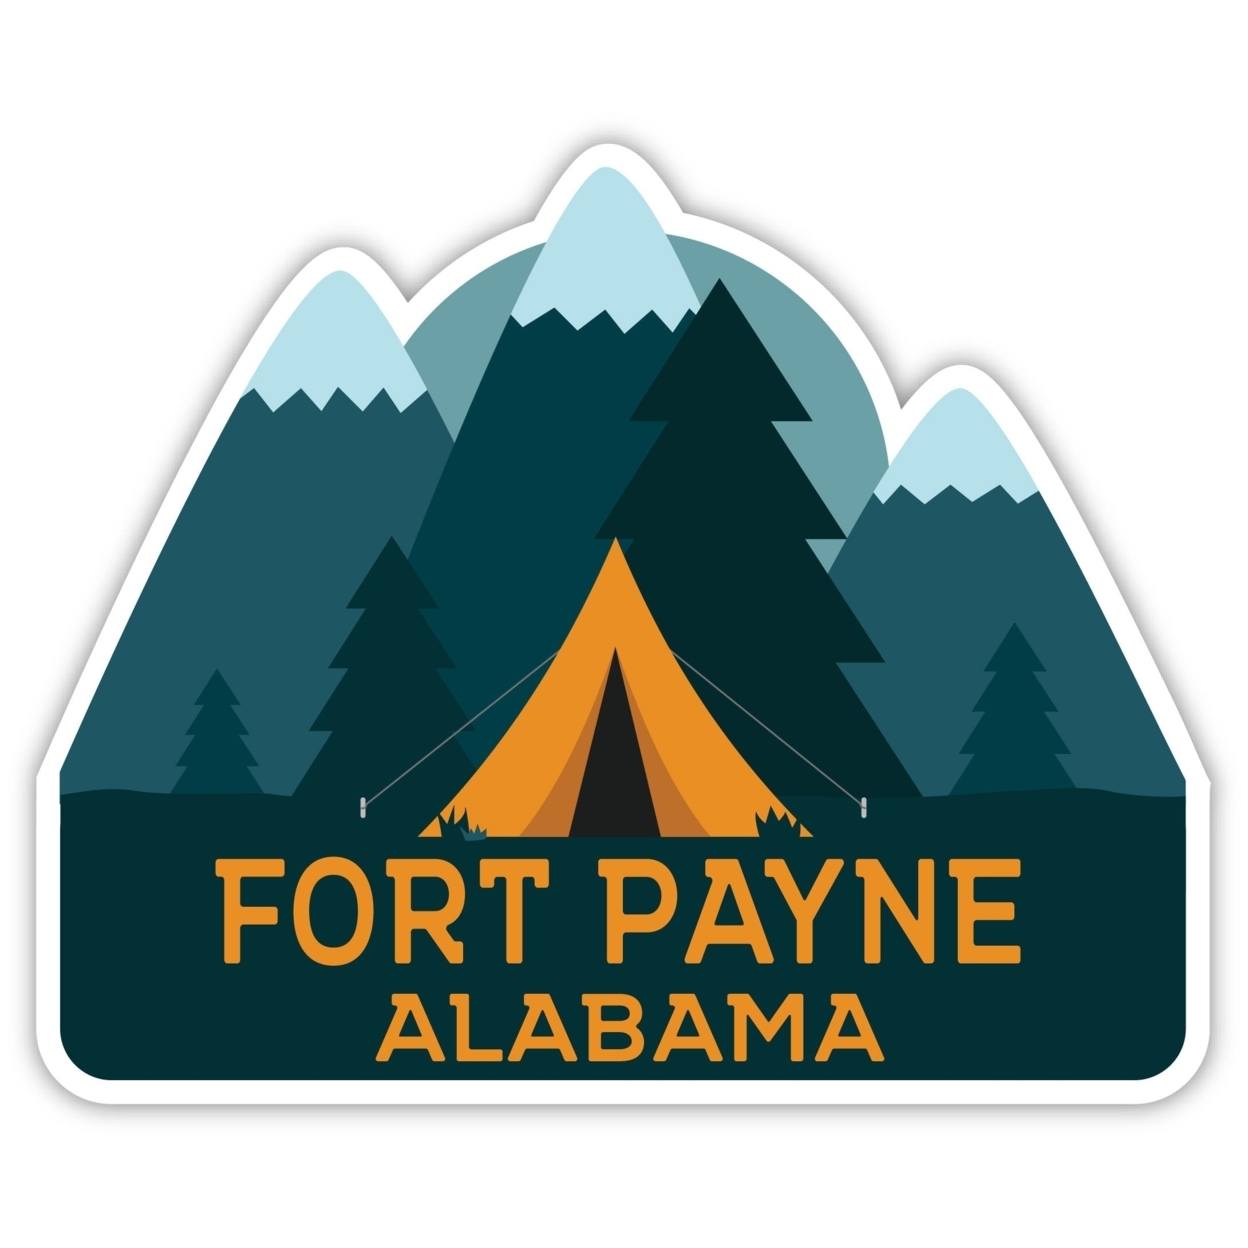 Fort Payne Alabama Souvenir Decorative Stickers (Choose Theme And Size) - 4-Pack, 10-Inch, Adventures Awaits